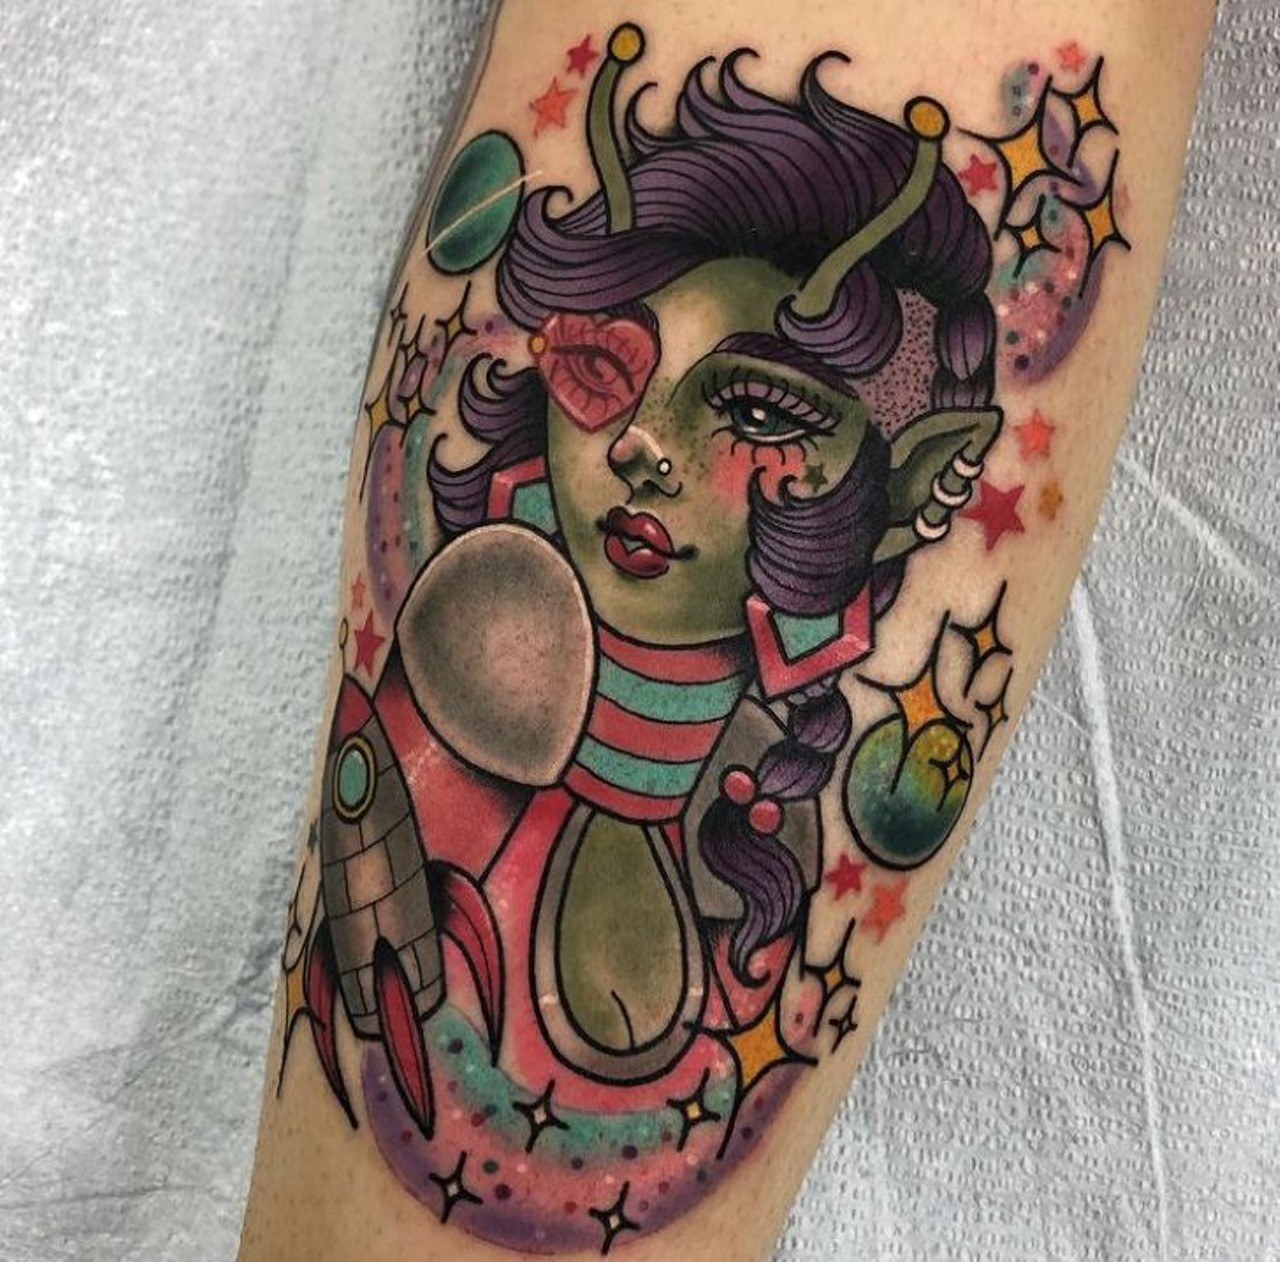 Jessica Hiemstra 
Rise Above Tattoo
1009 N. Mills Ave., 407-730-3142
Jessica Hiemstra&#146;s funky, fun and illustrative tattoos are perfect for animal or punk-alien portraits. You can find her work at Rise Above Tattoo. 
Photo via hammyhram/Instagram